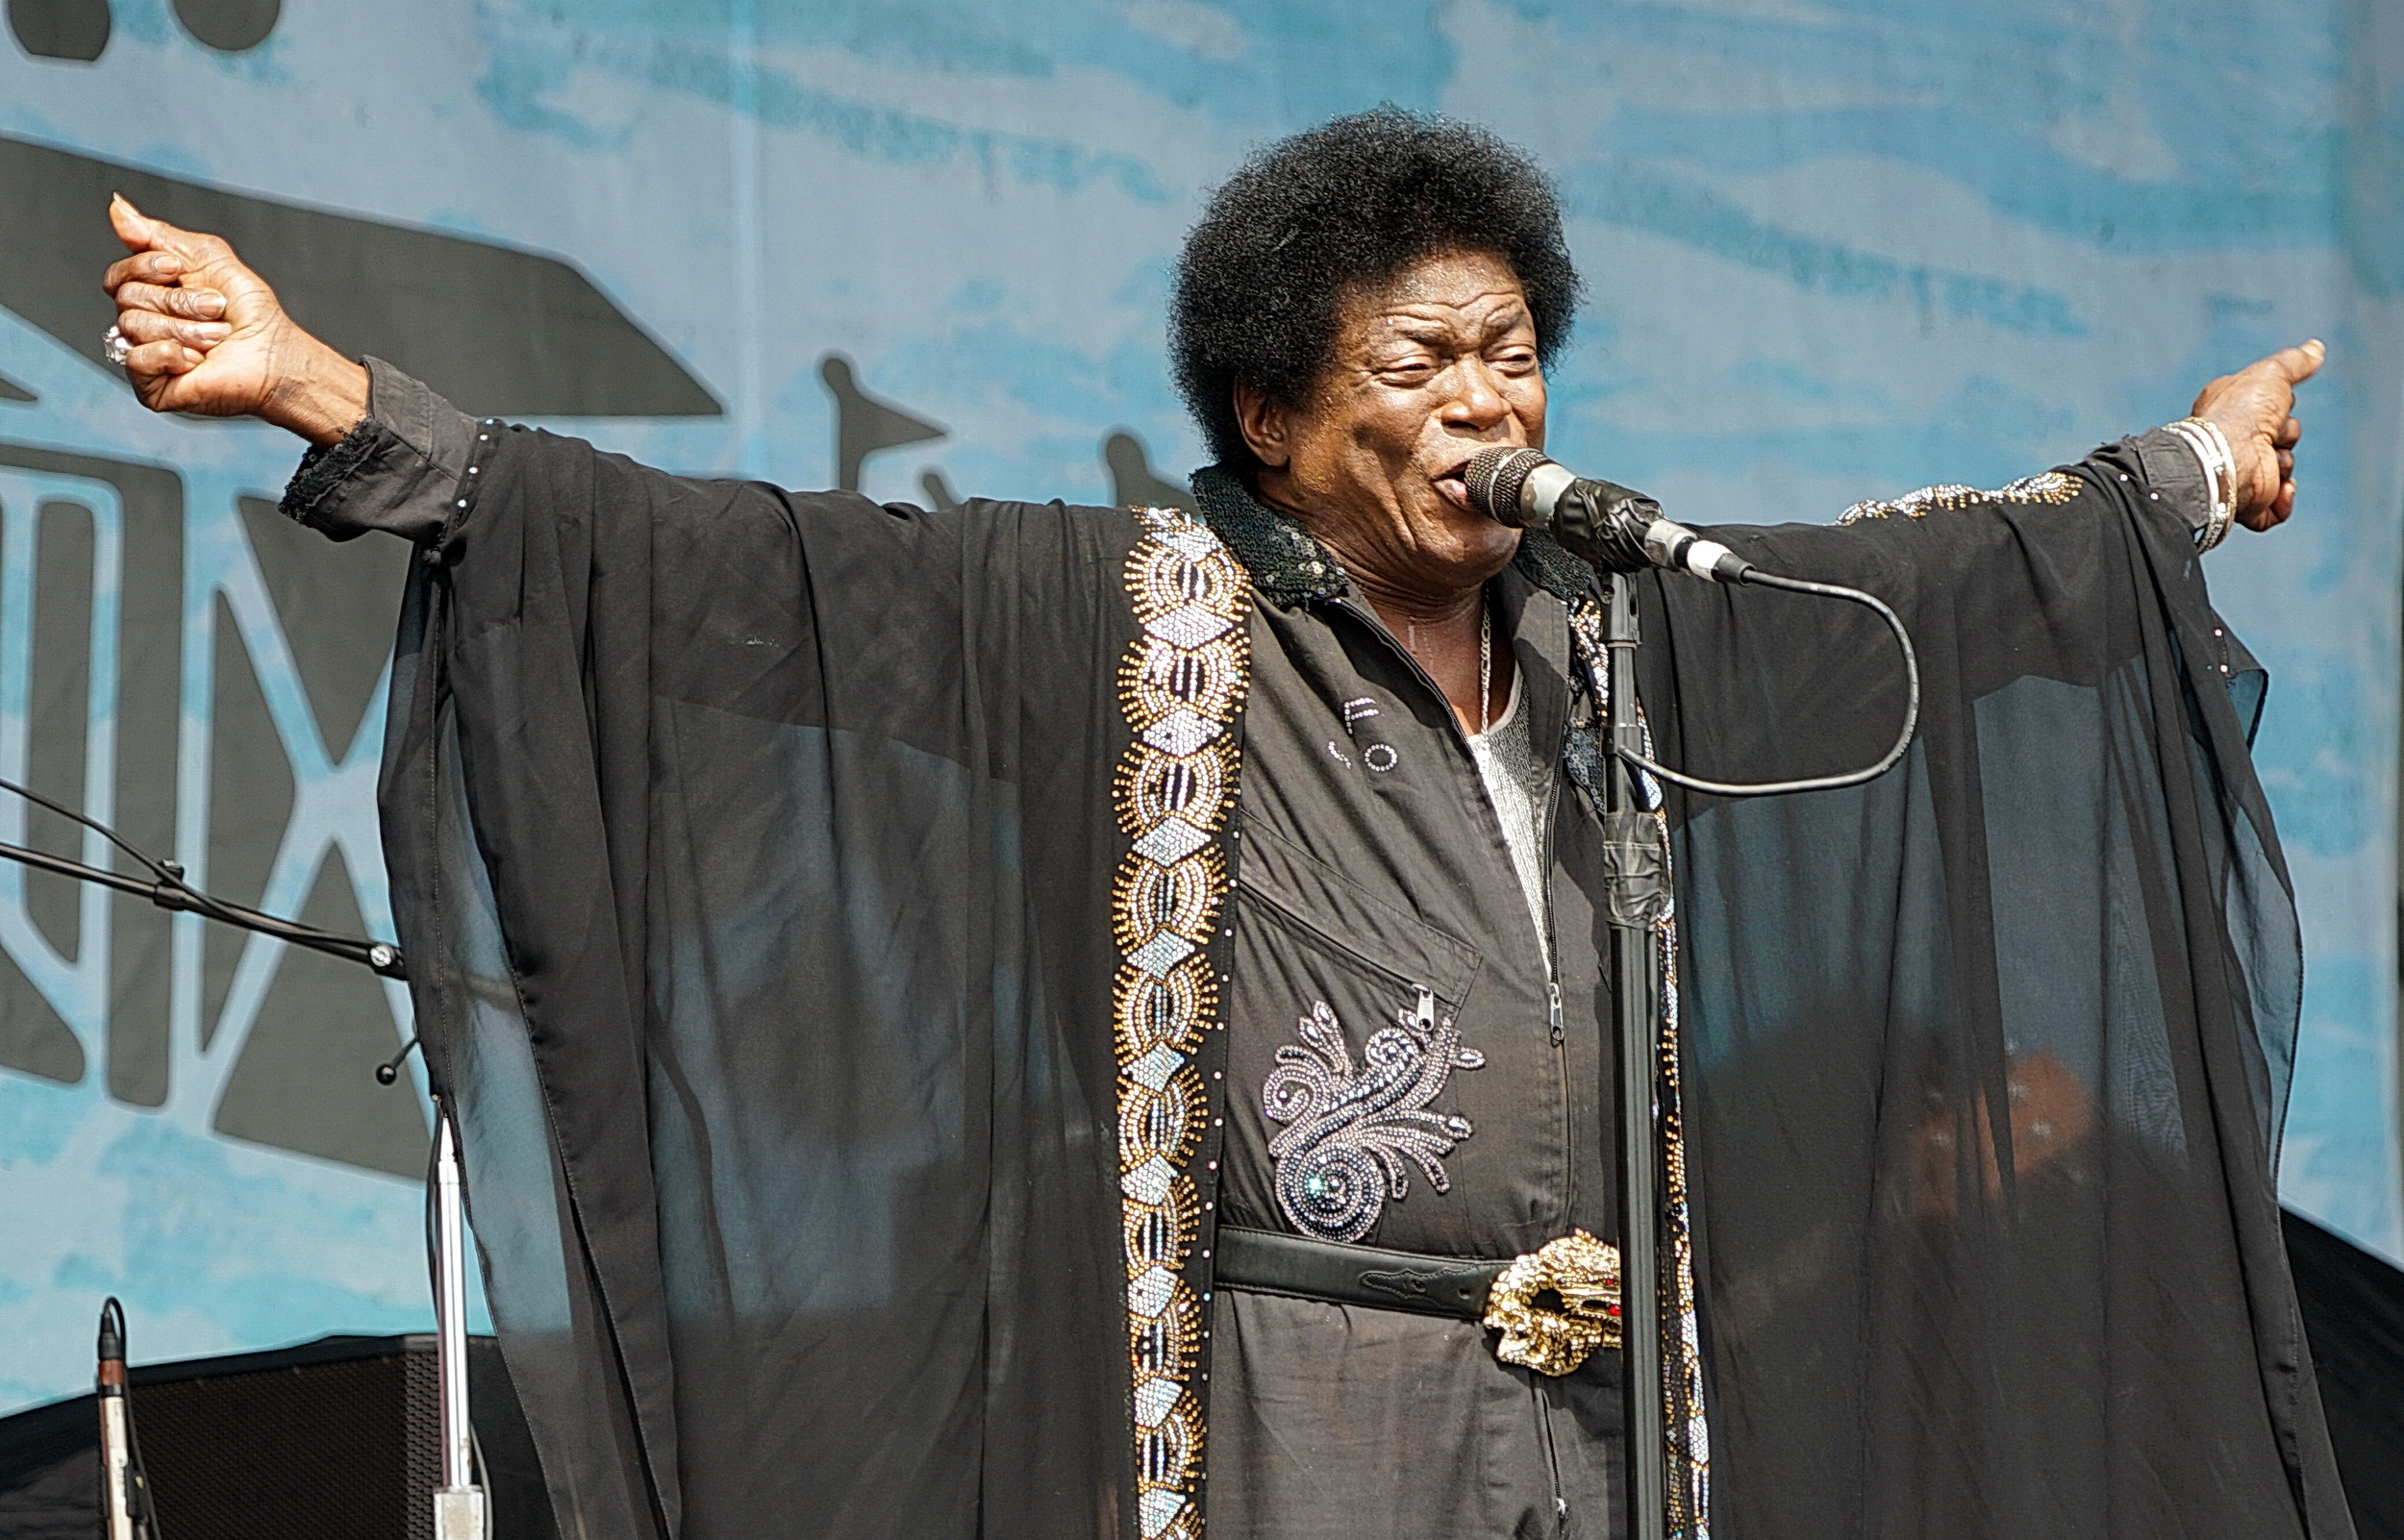 A Charles Bradley and his Extroidanaires (187).JPG